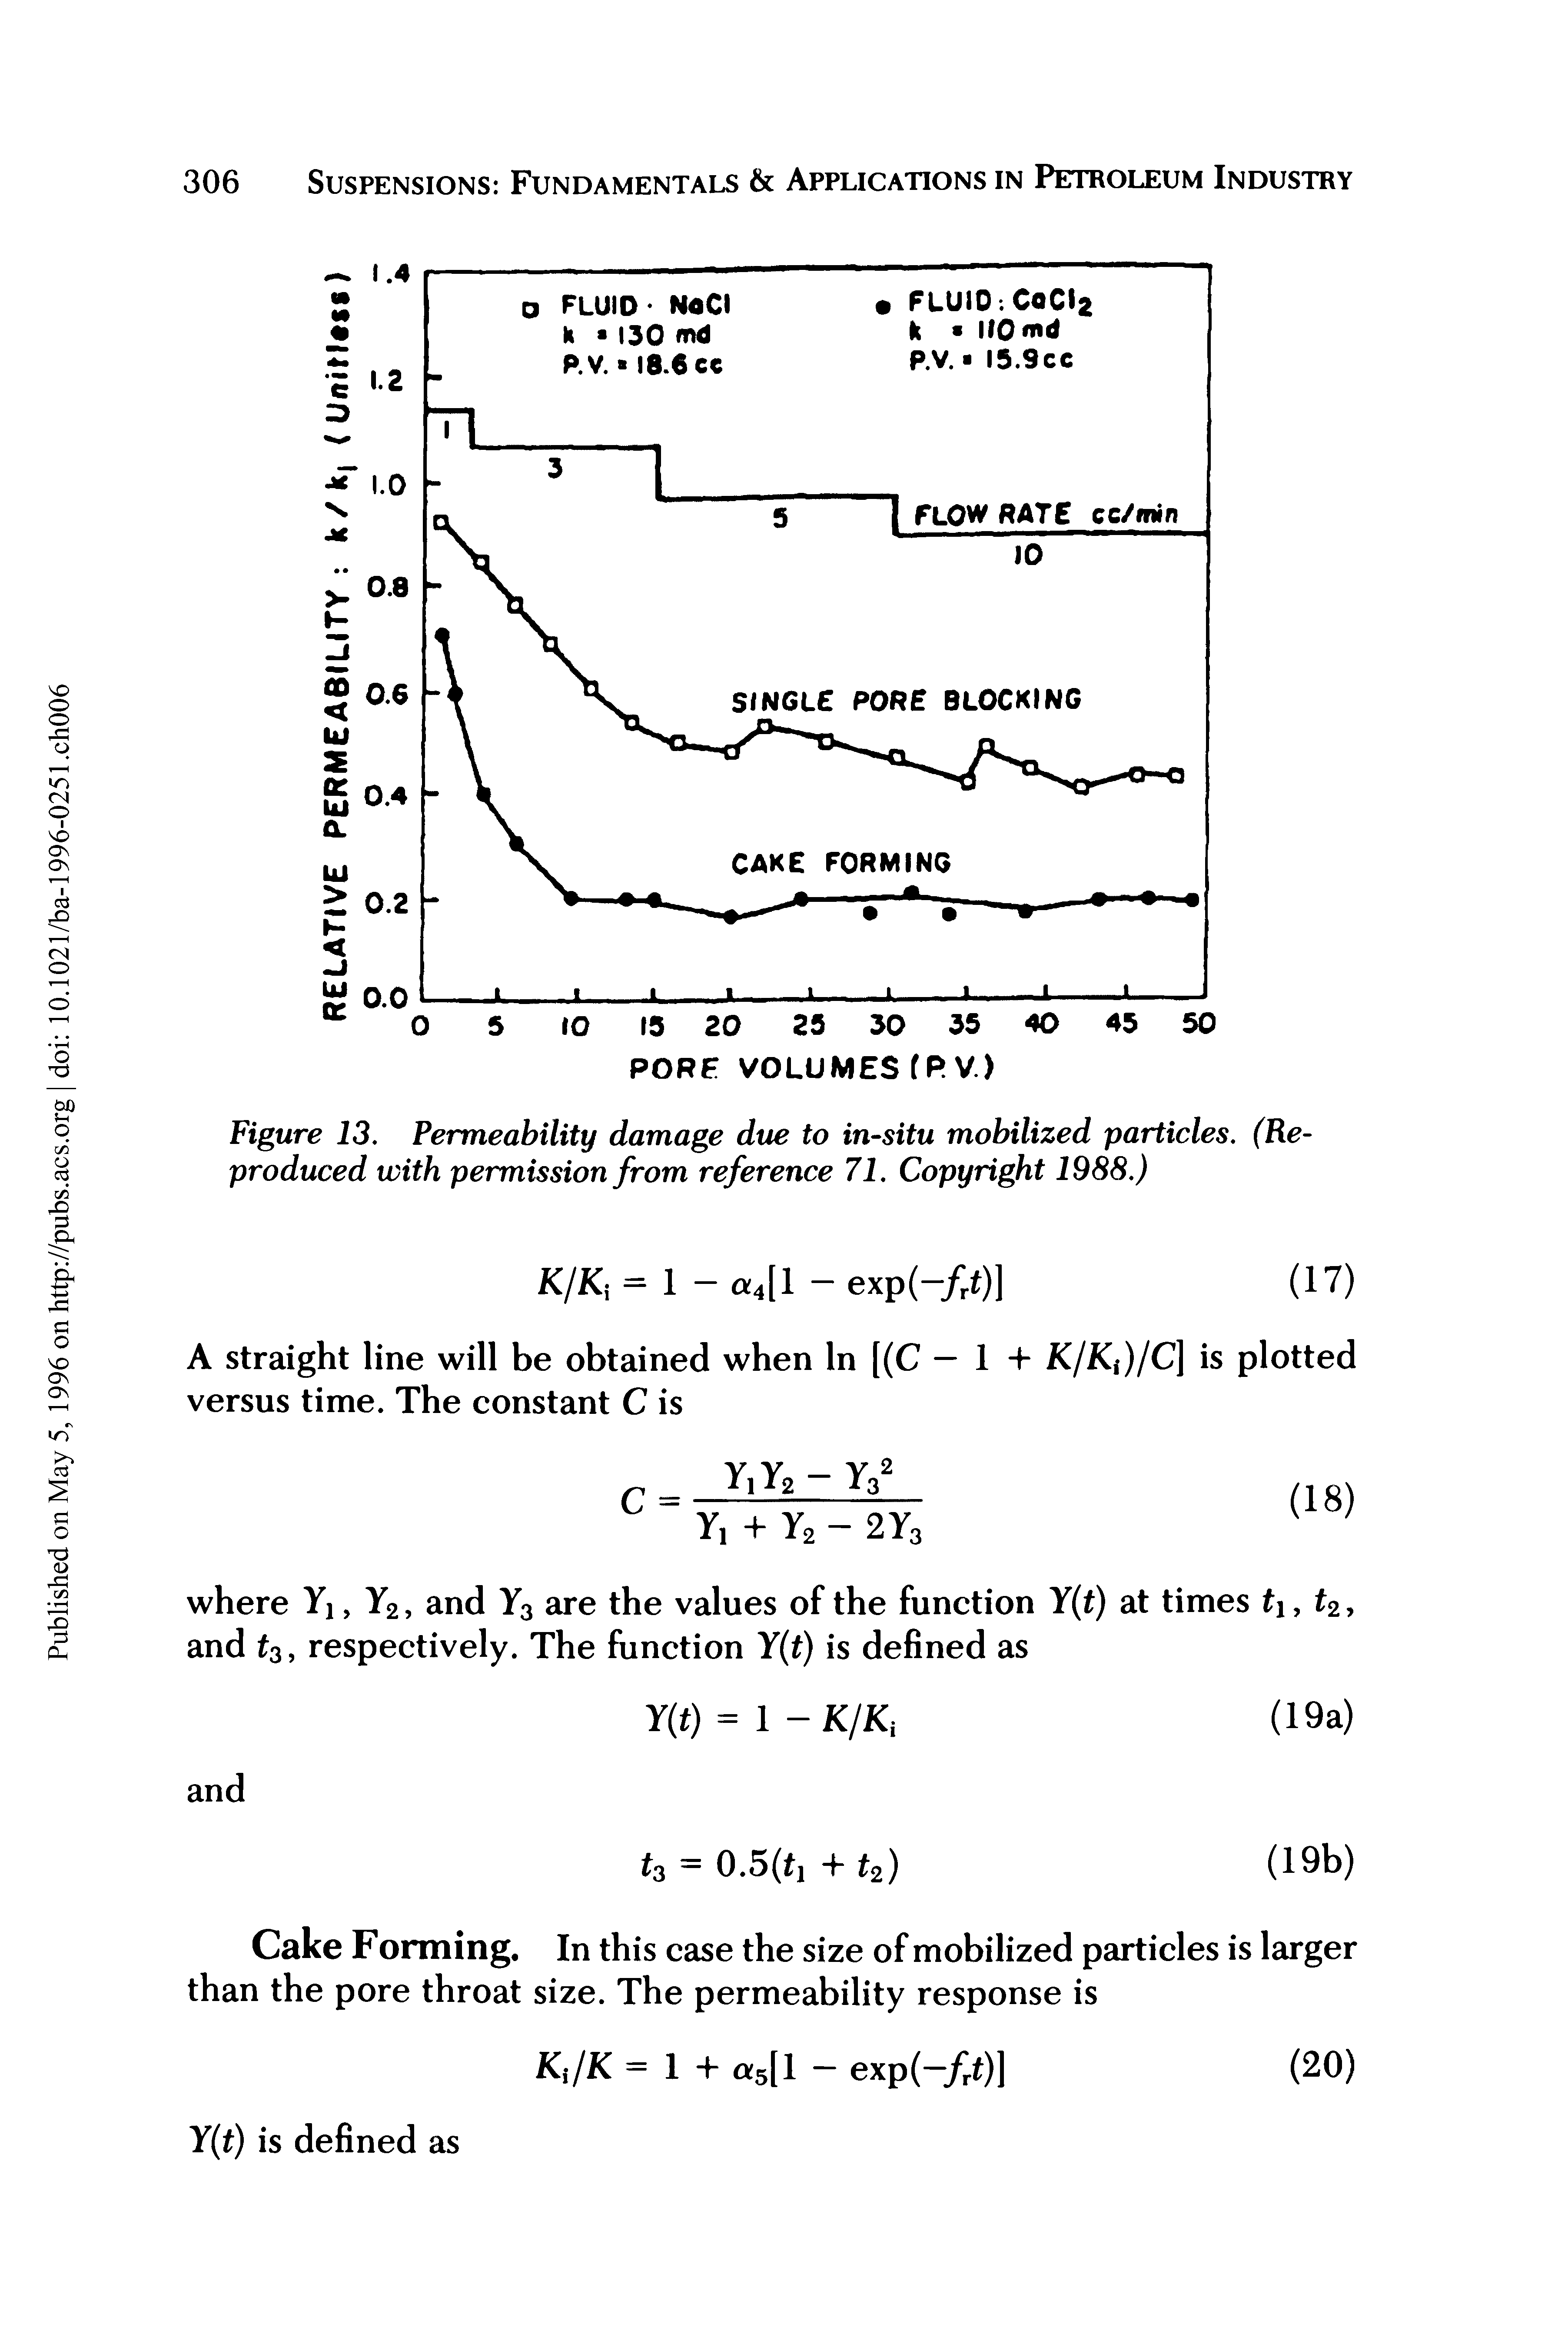 Figure 13, Permeability damage due to in-situ mobilized particles, (Reproduced with permission from reference 71, Copyright 1988,)...